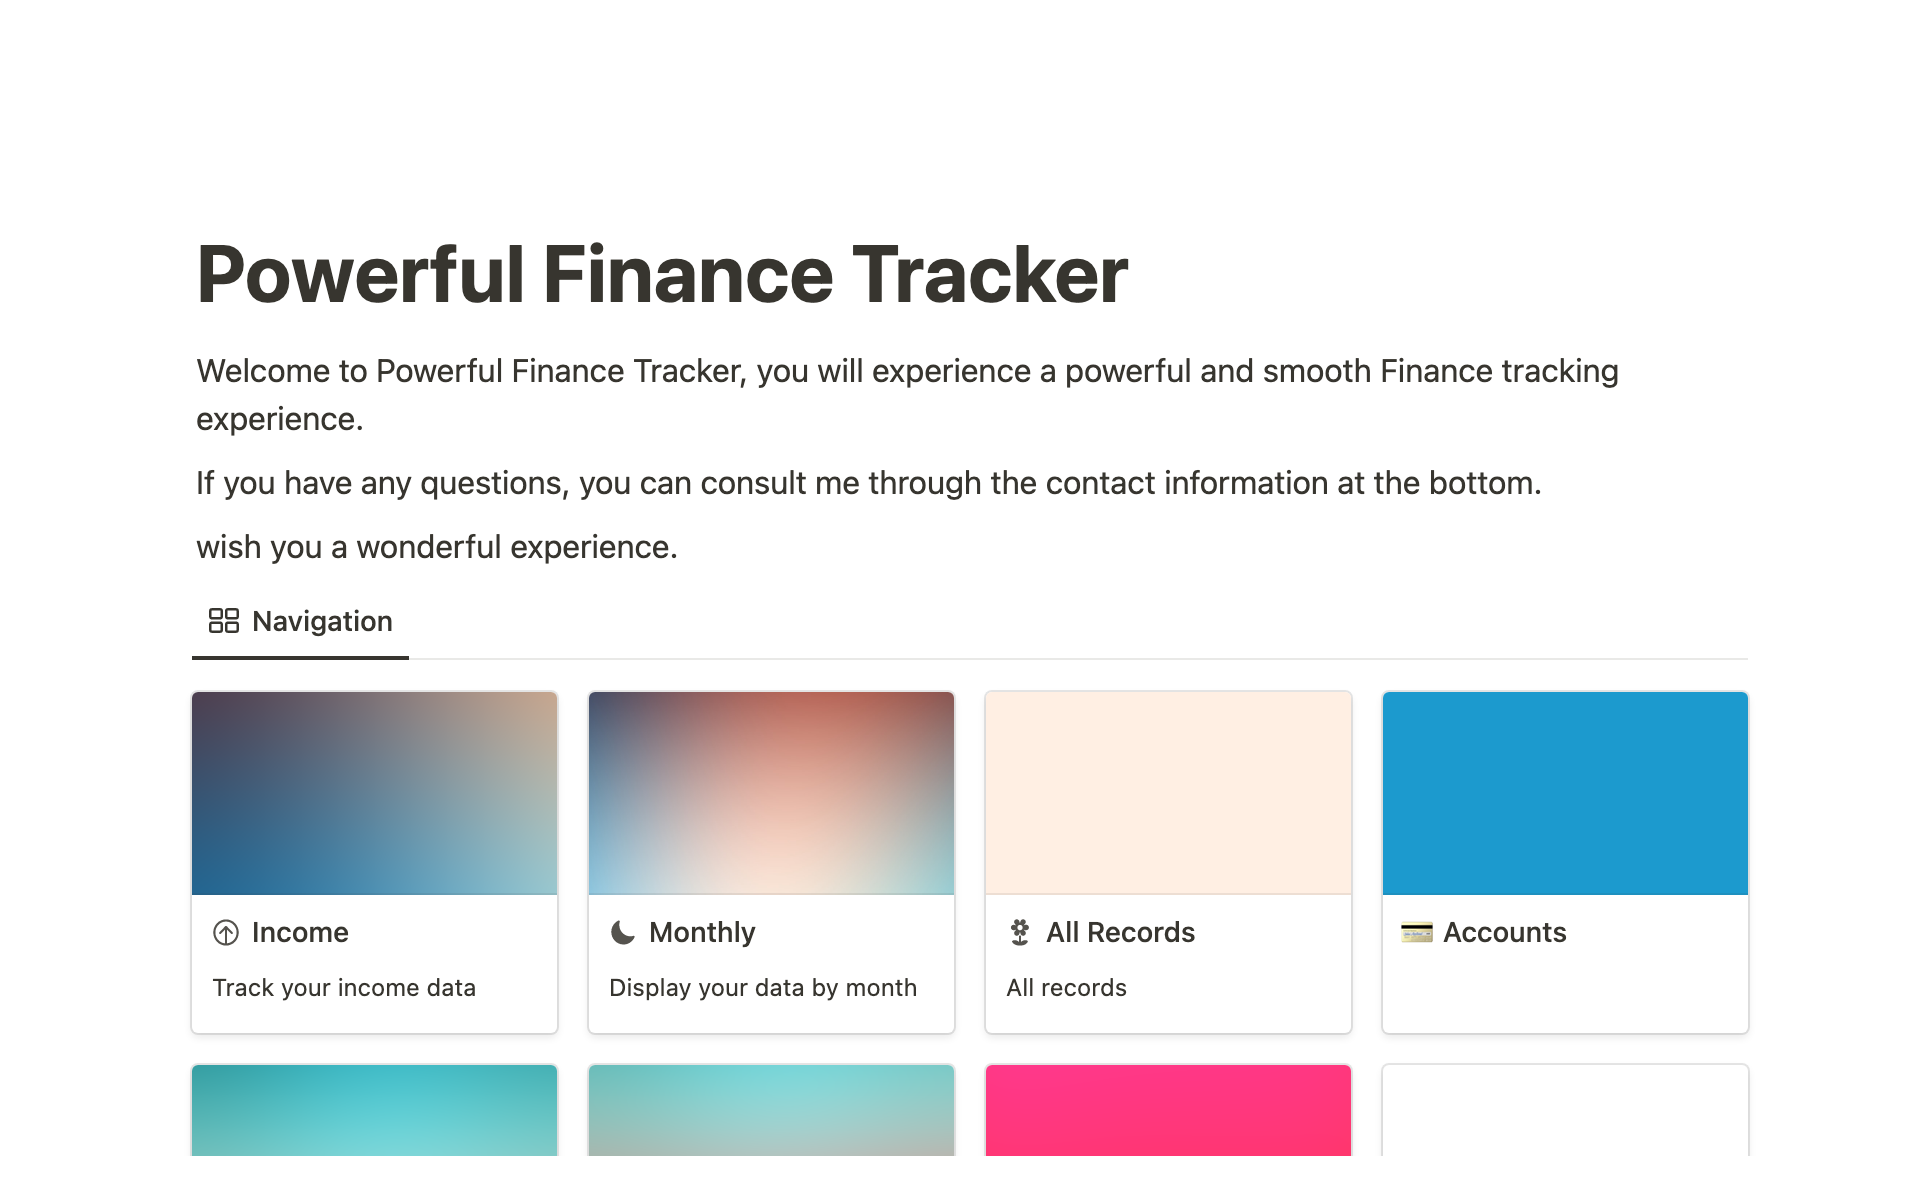 Track your finances with ease. Get the whole overview in a matter of click.